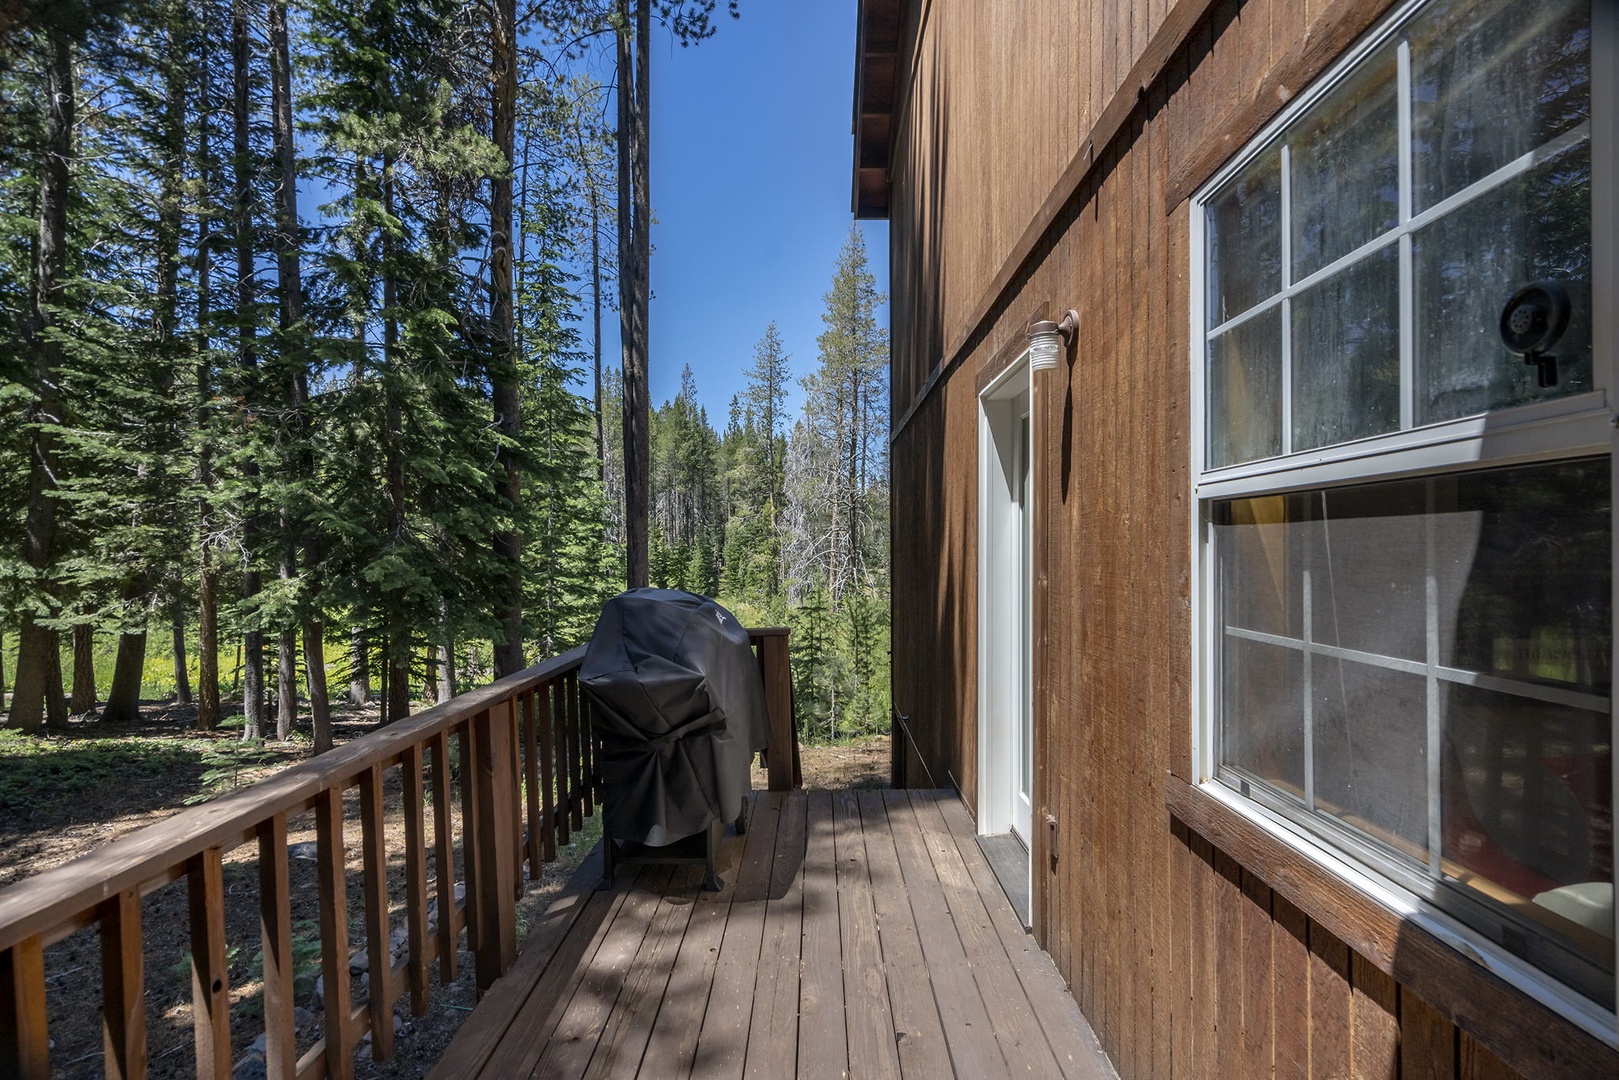 Side deck with gas grill: 
Donner Lake Vacation Lodge